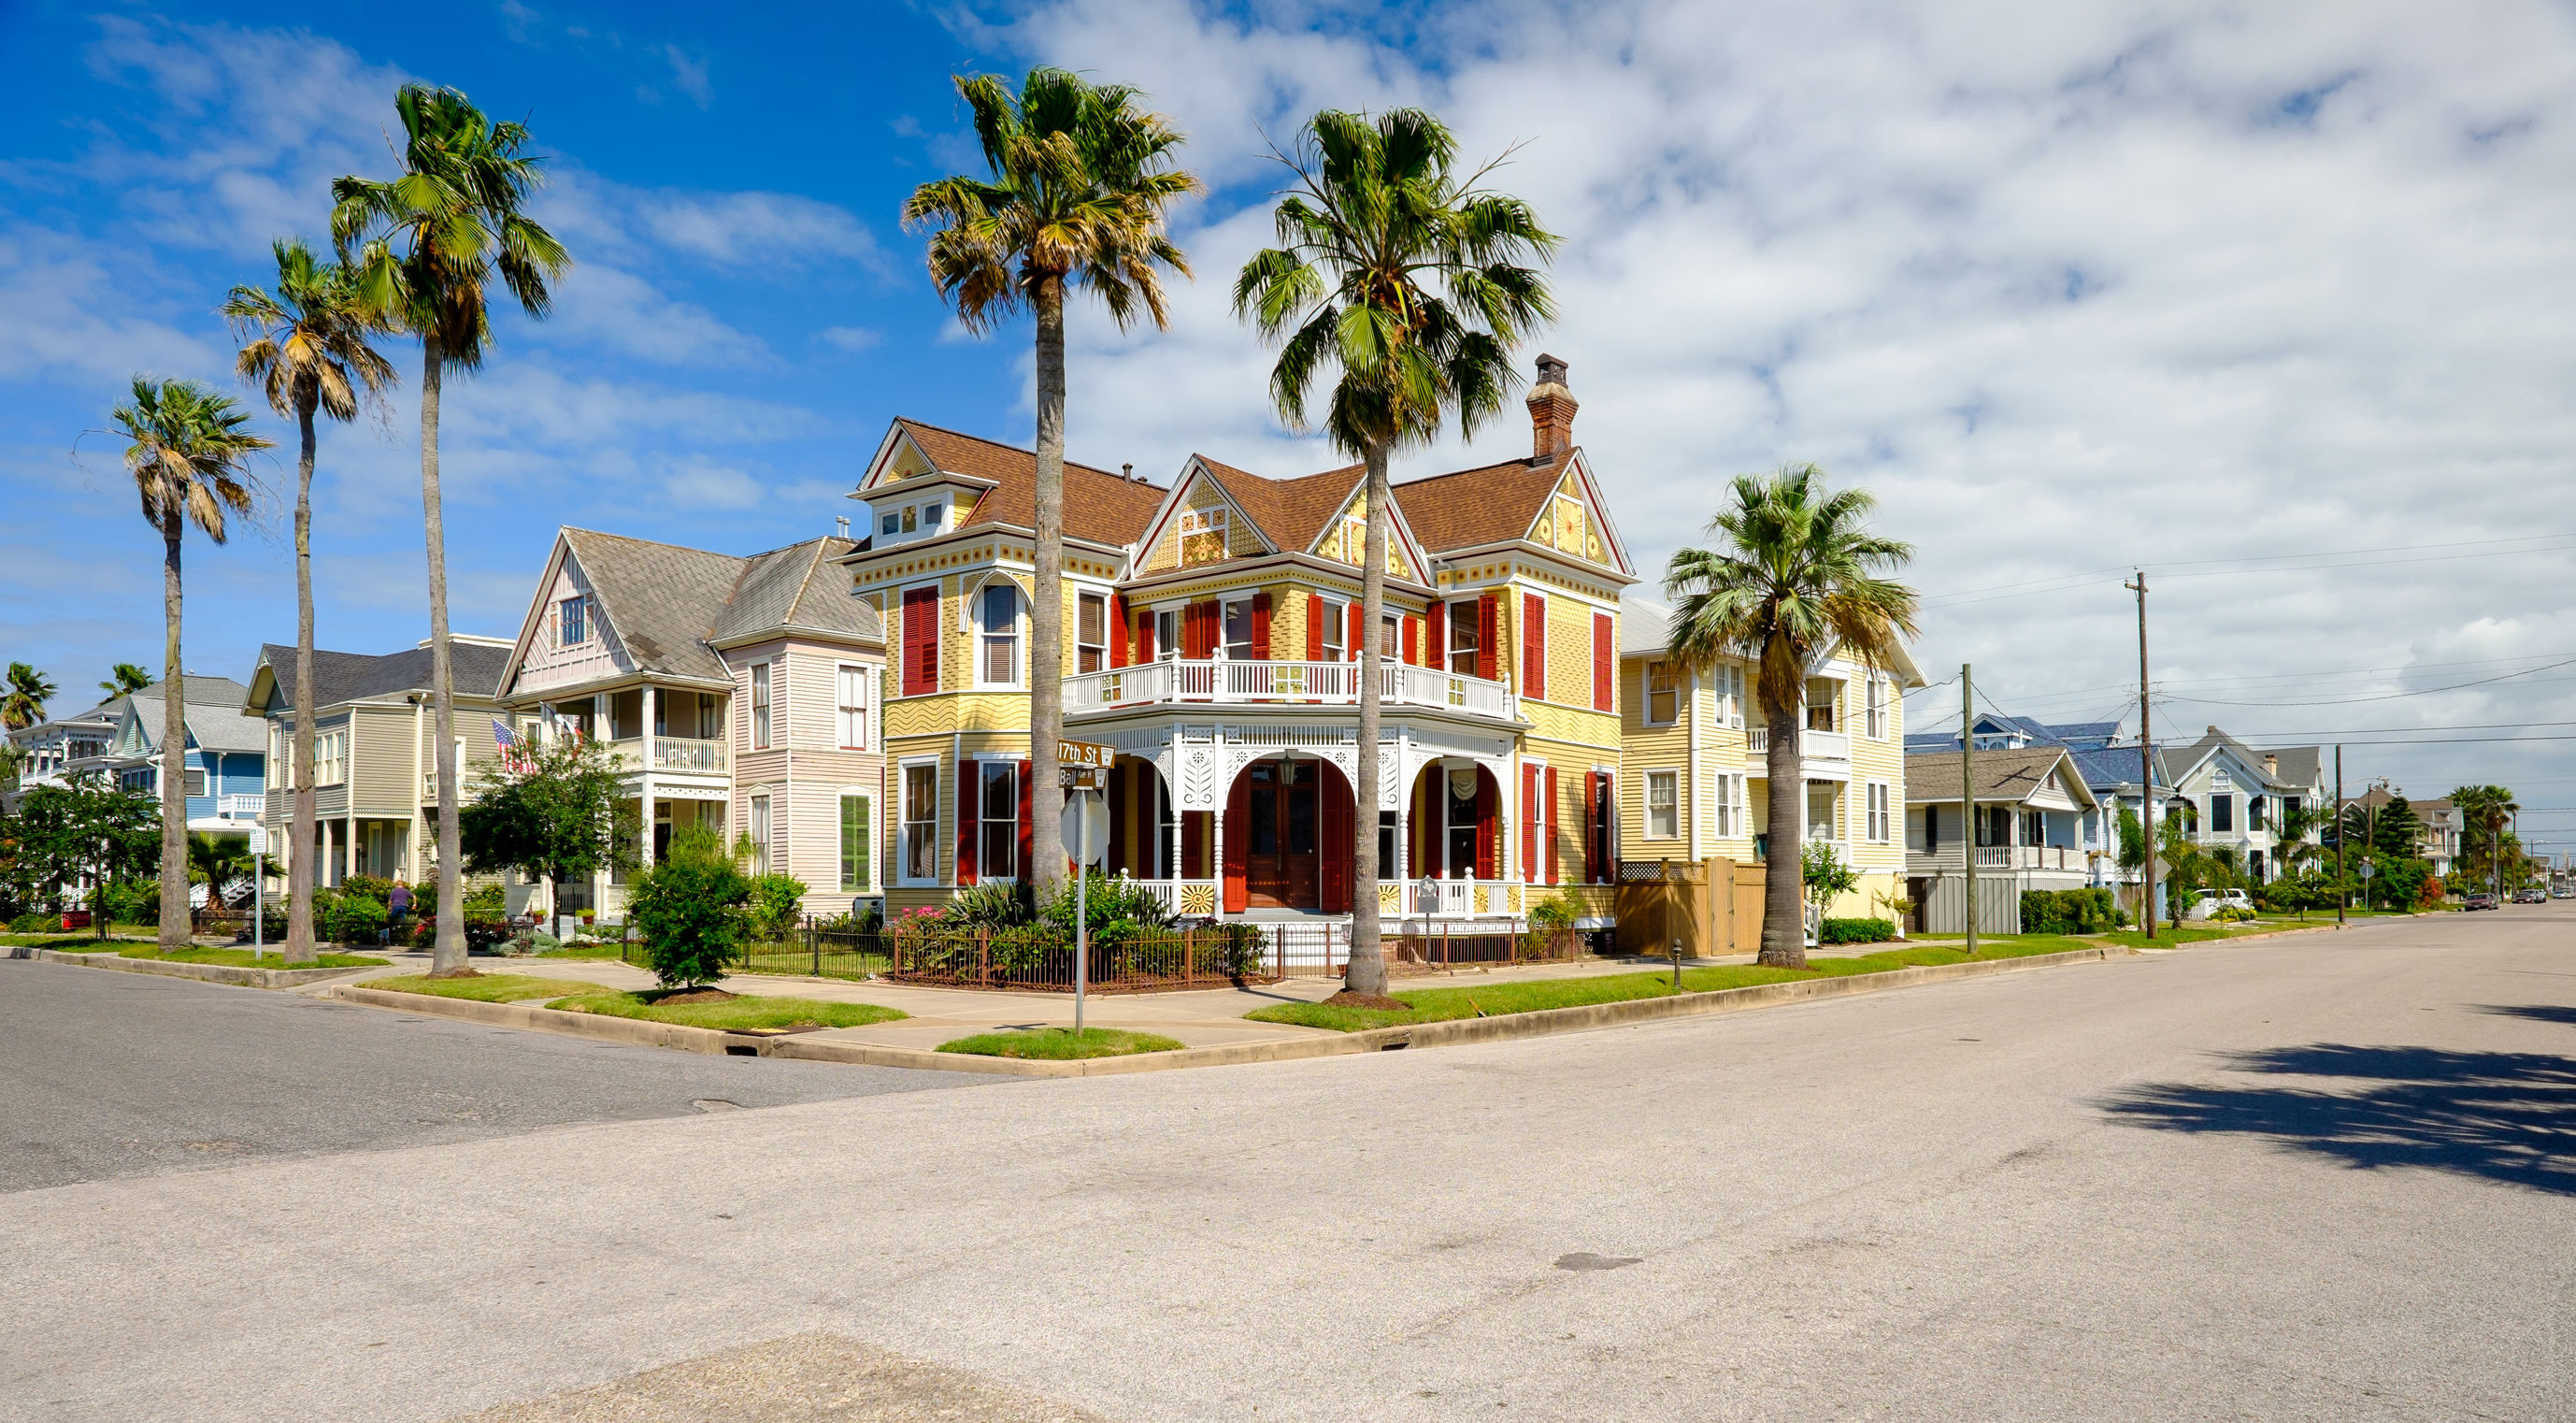 General stock image of houses